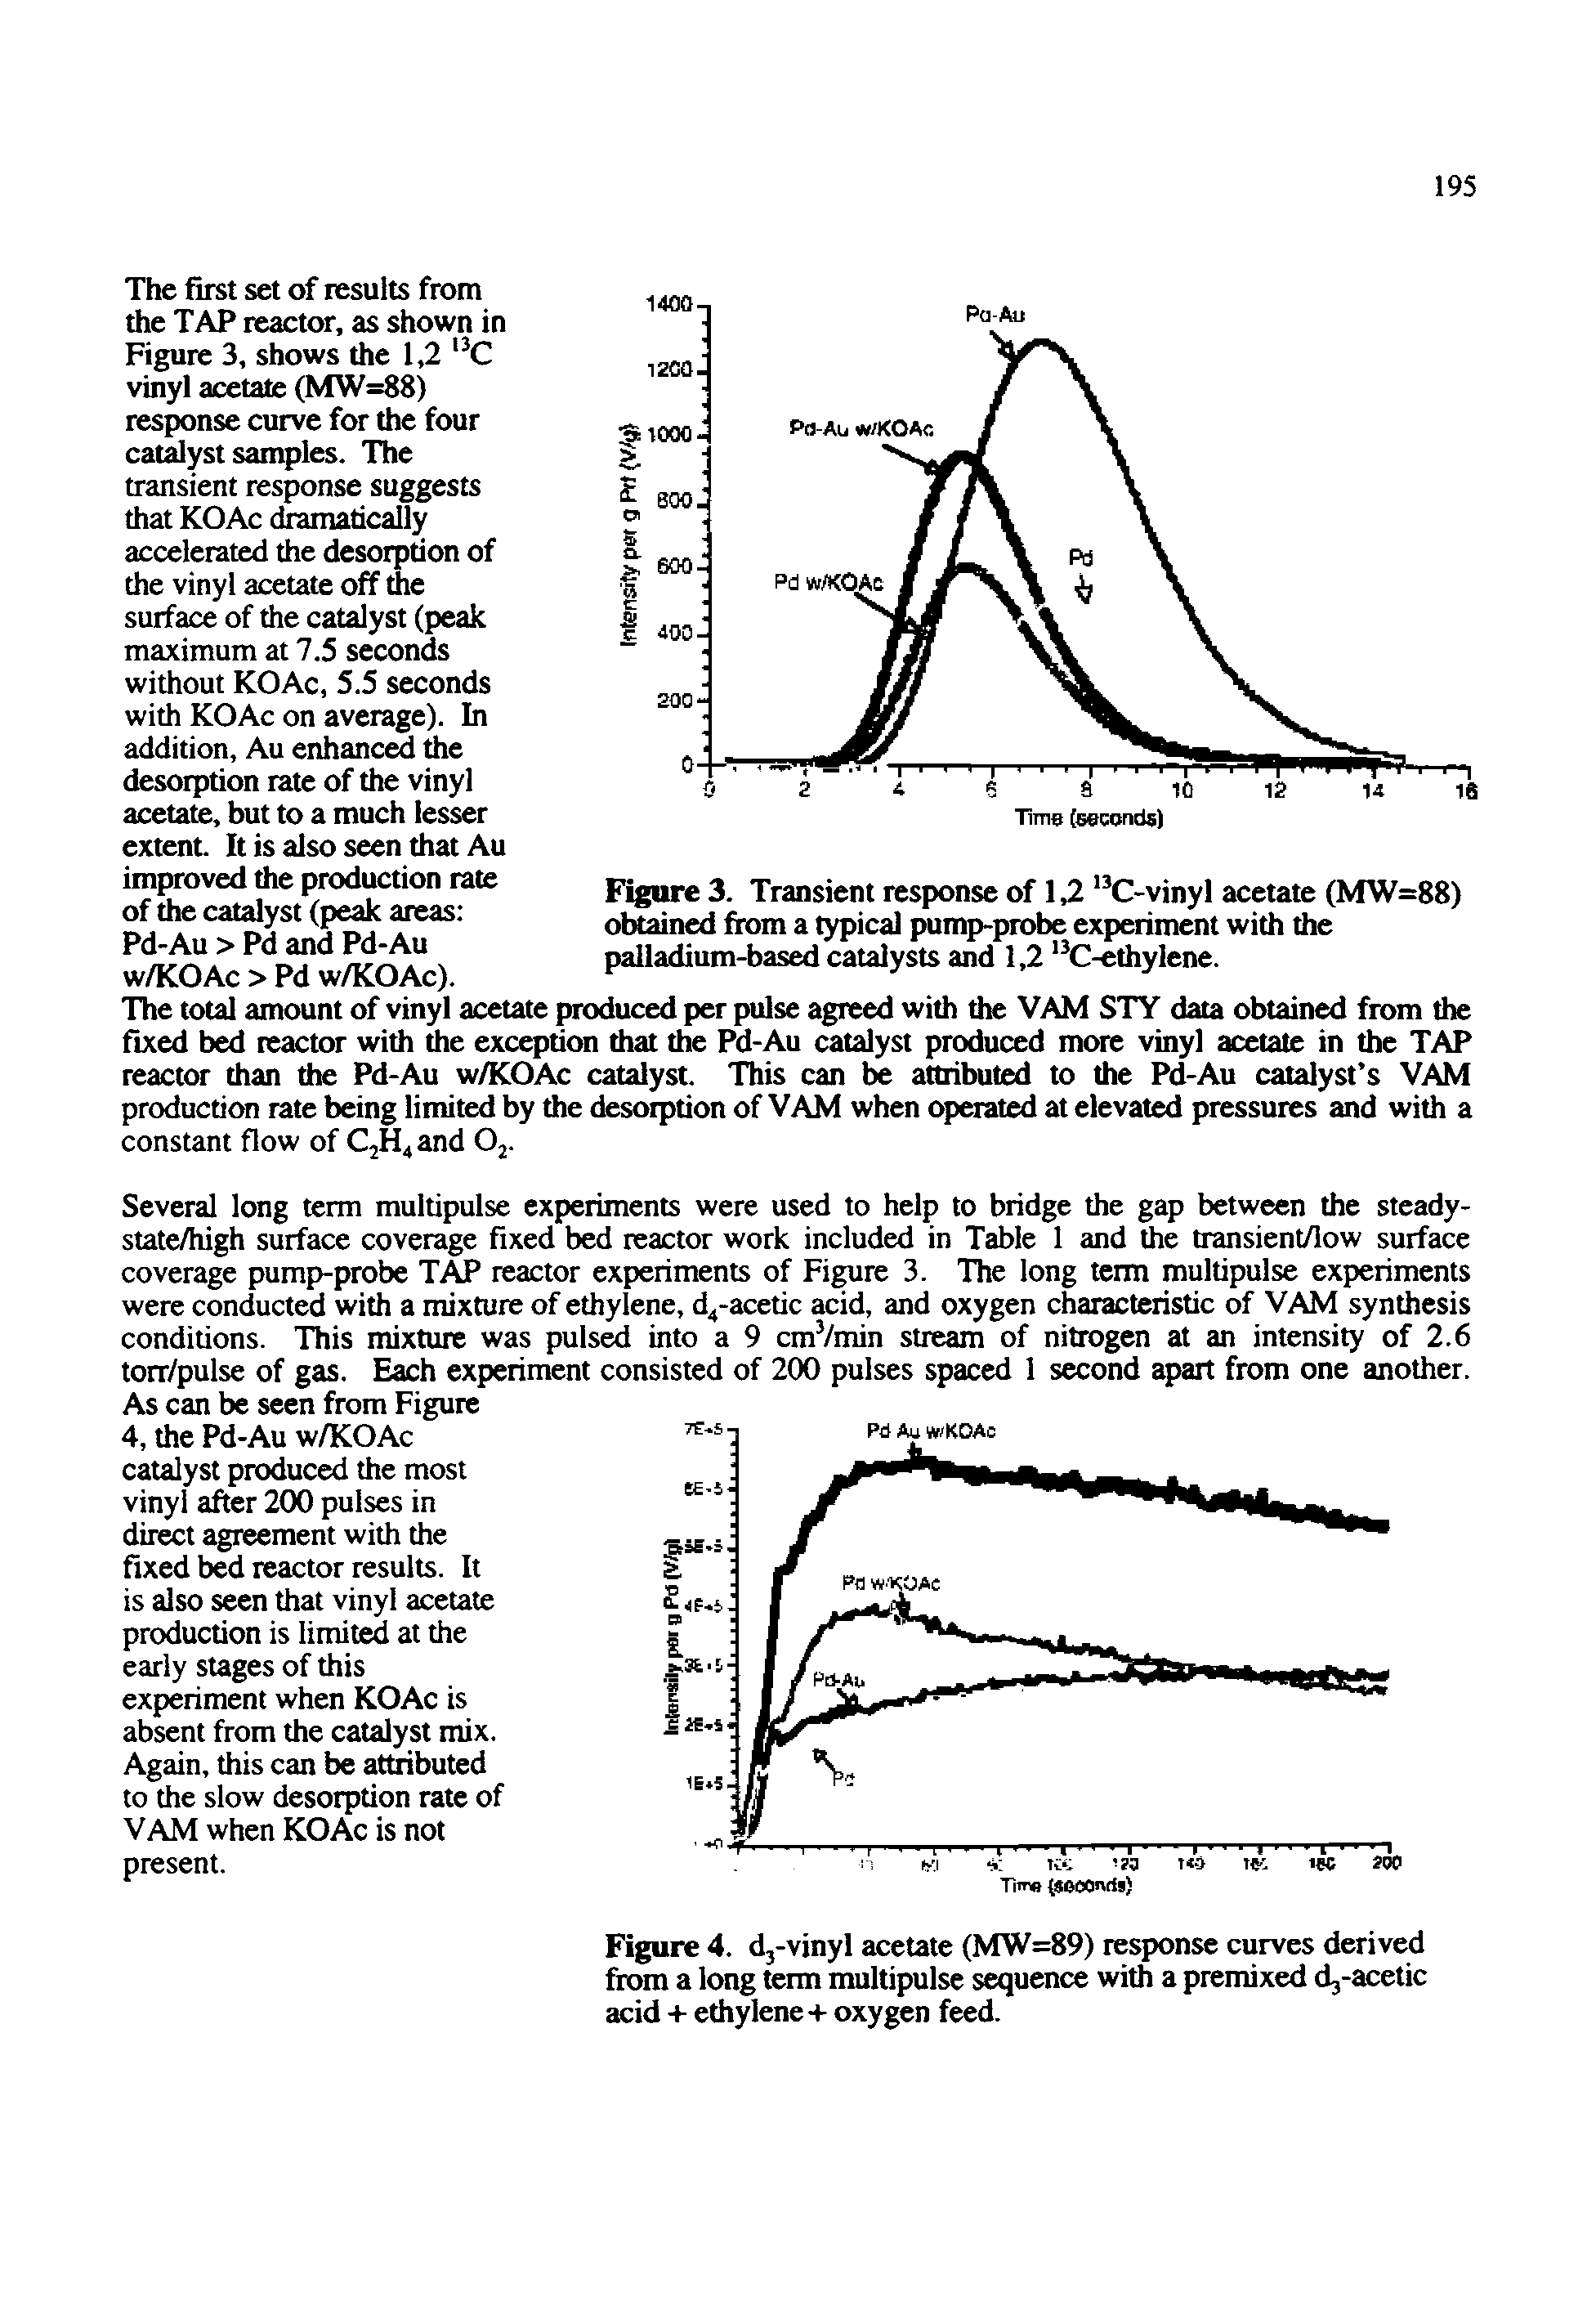 Figure 3. Transient response of 1,2 C-vinyl acetate (MW=88) obtained from a typical pump-probe experiment with the palladium-based catalysts and 1,2 C-ethylene.